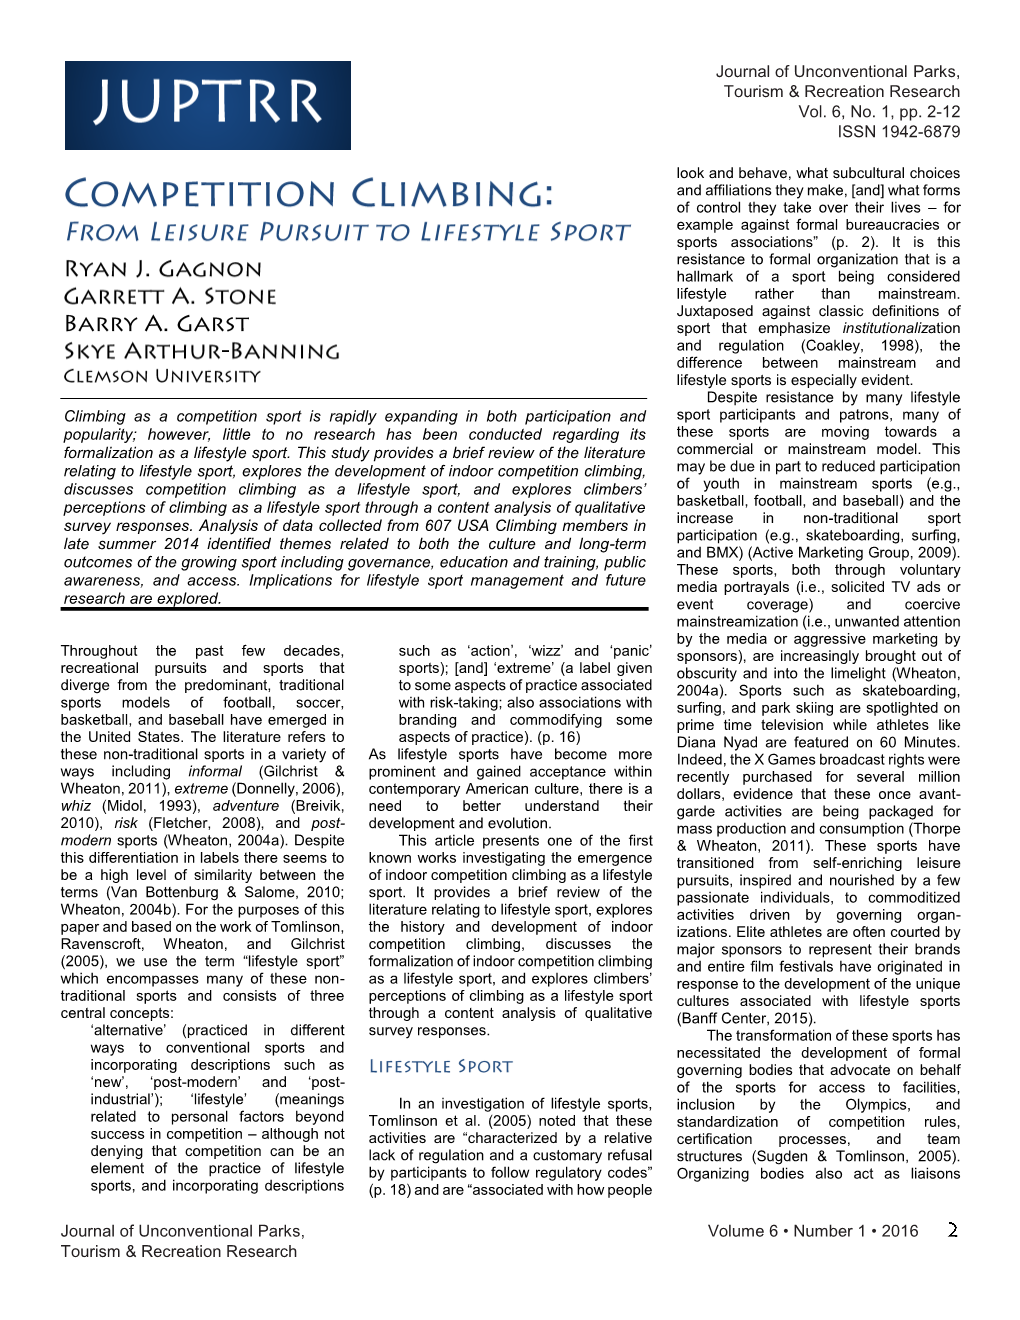 Competition Climbing: from Leisure Pursuit to Lifestyle Sport